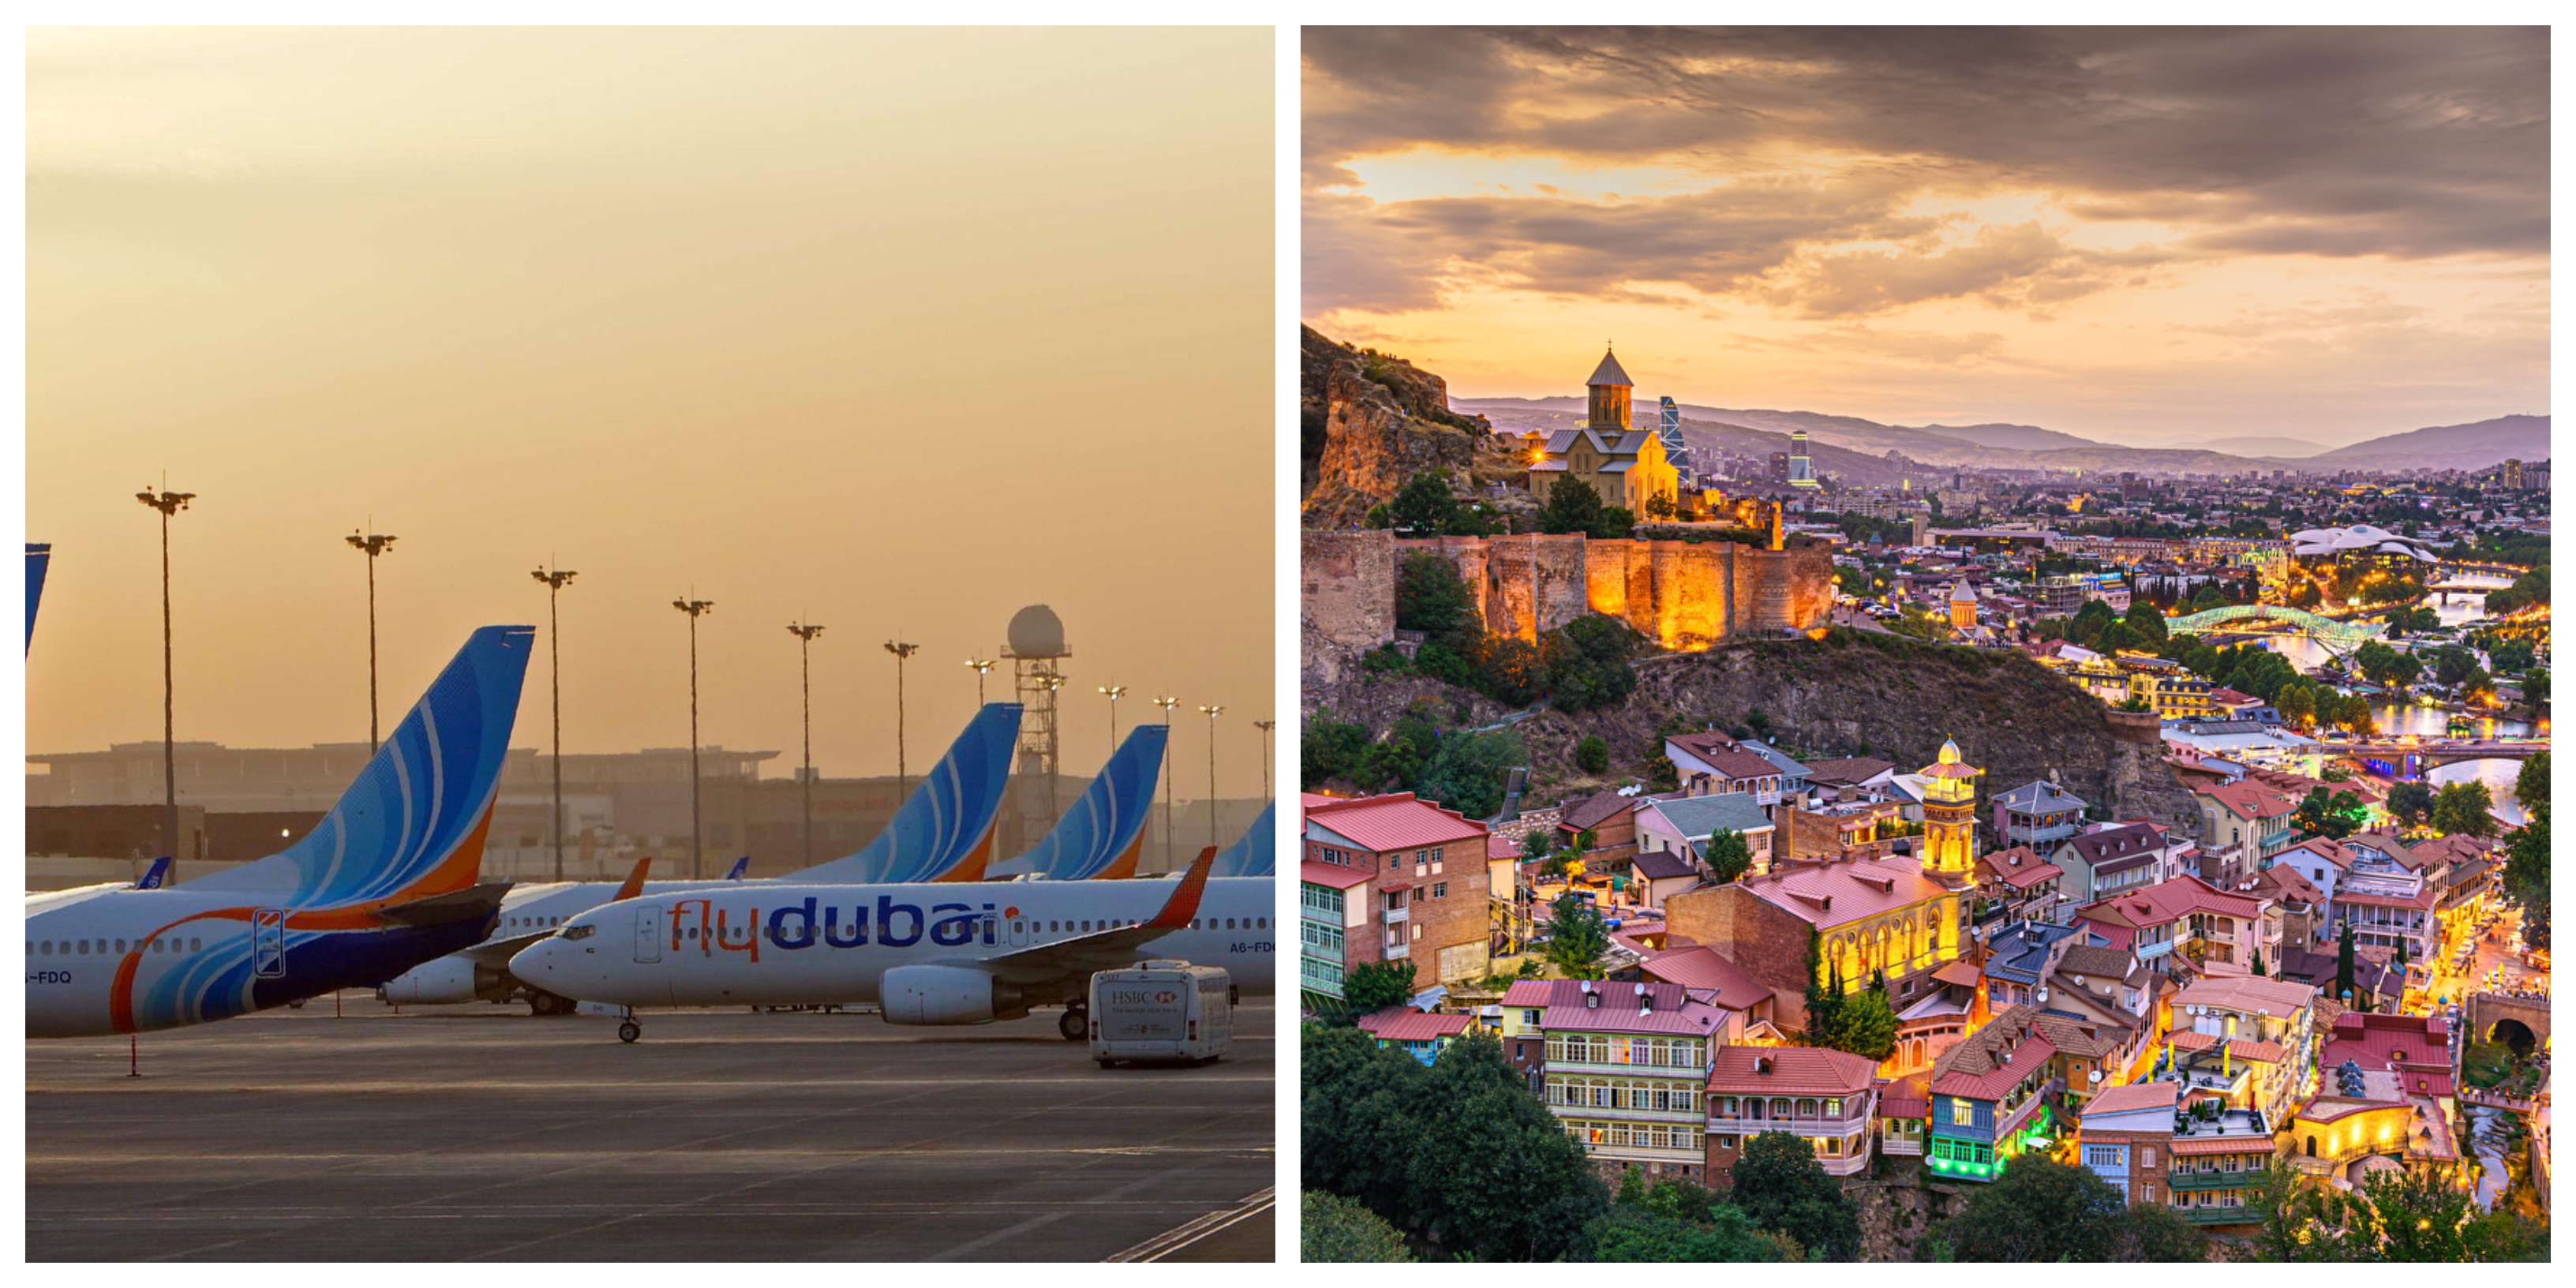 Flydubai To Resume Flights To 24 Destinations From 7 July